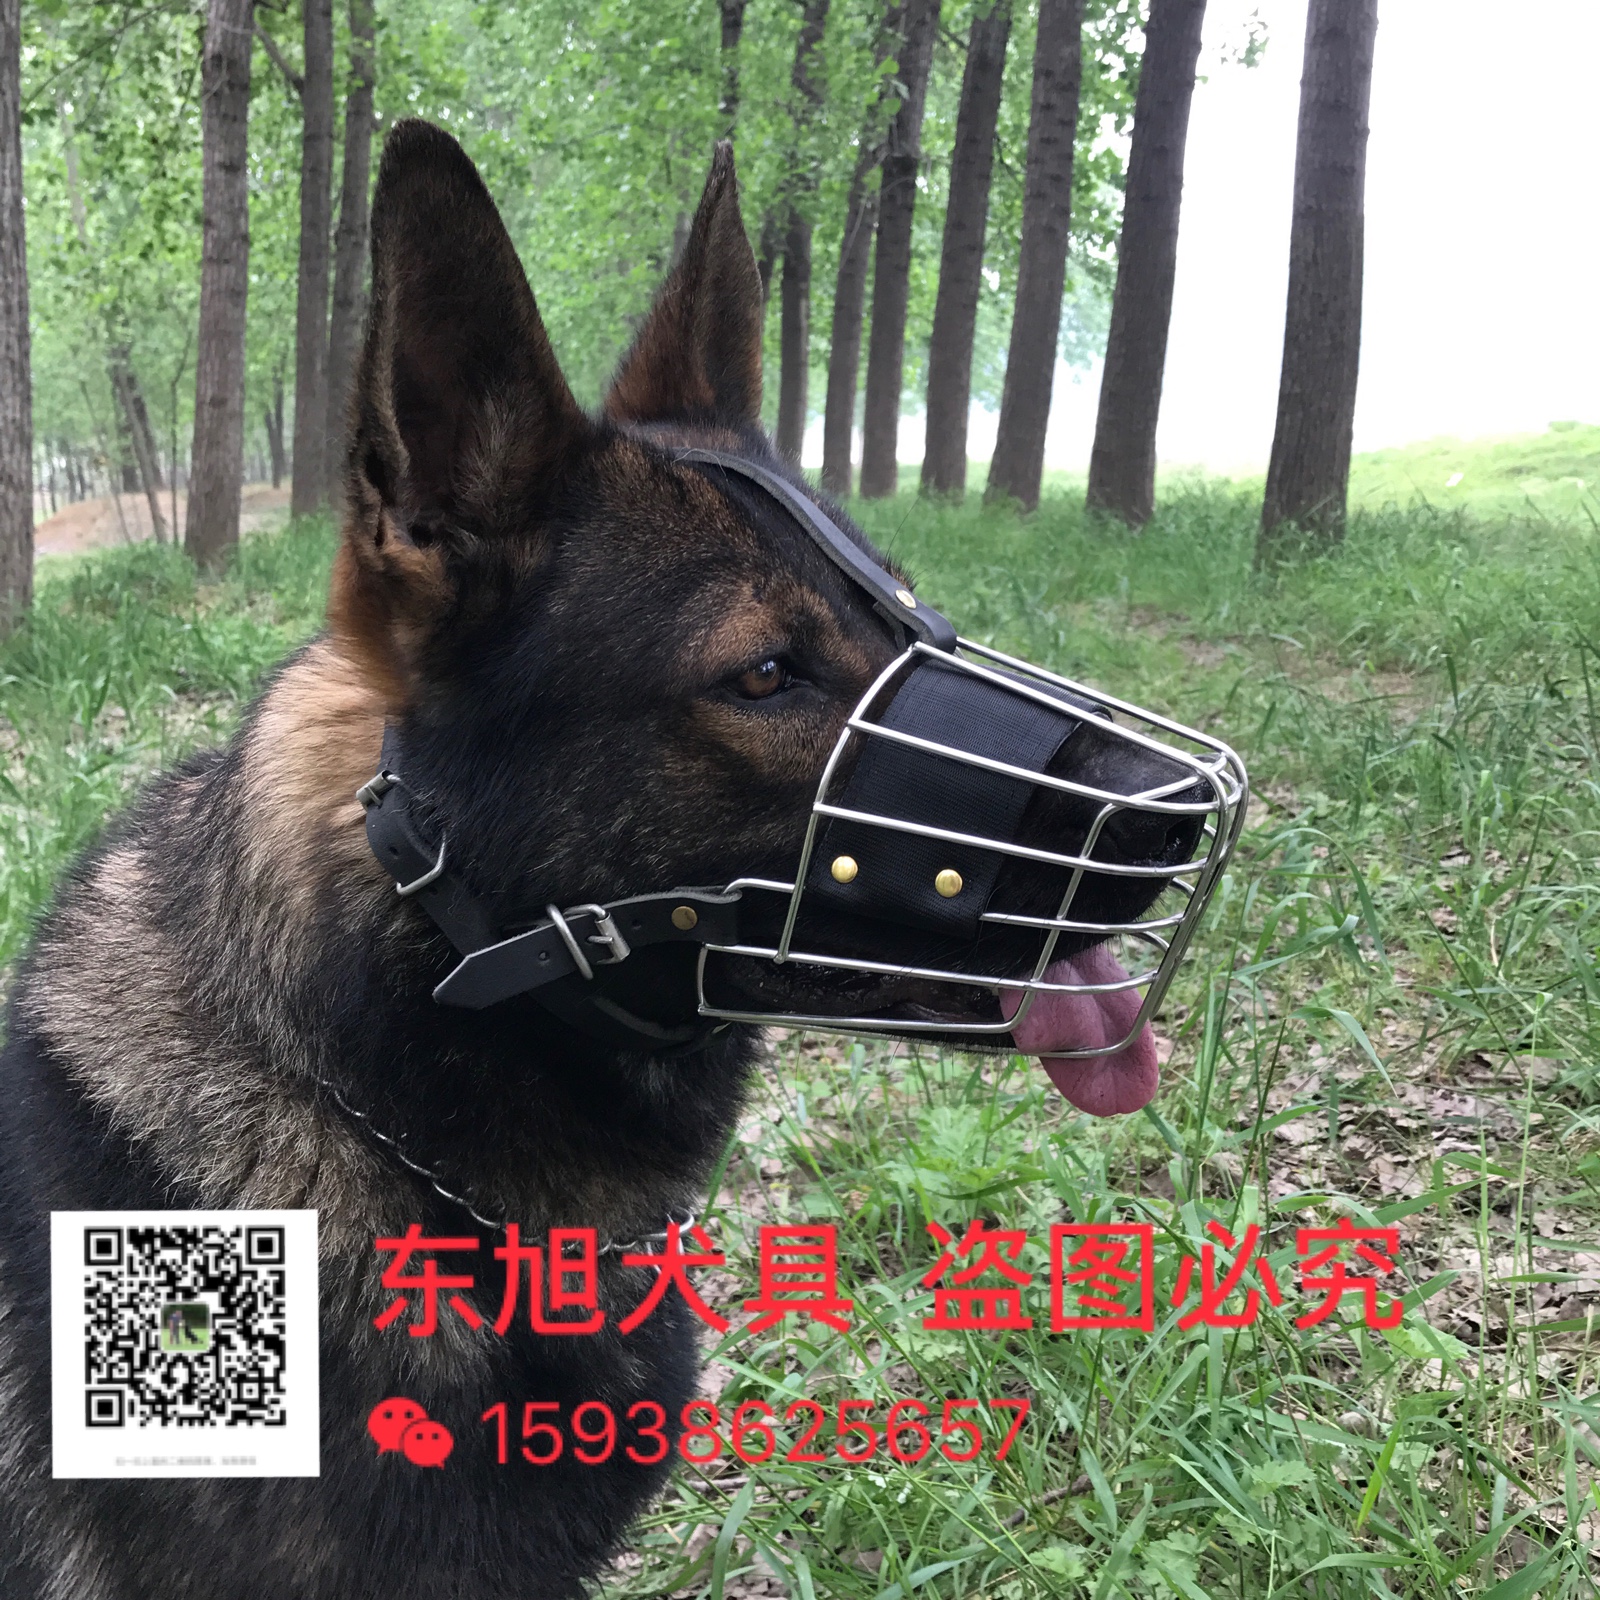 Despastoral Special Mouth Cover Horse Dog Stainless Steel Fasting Bull Leather Metal Mouth Cage Anti Dog Bite Mask Training Dog Supplies